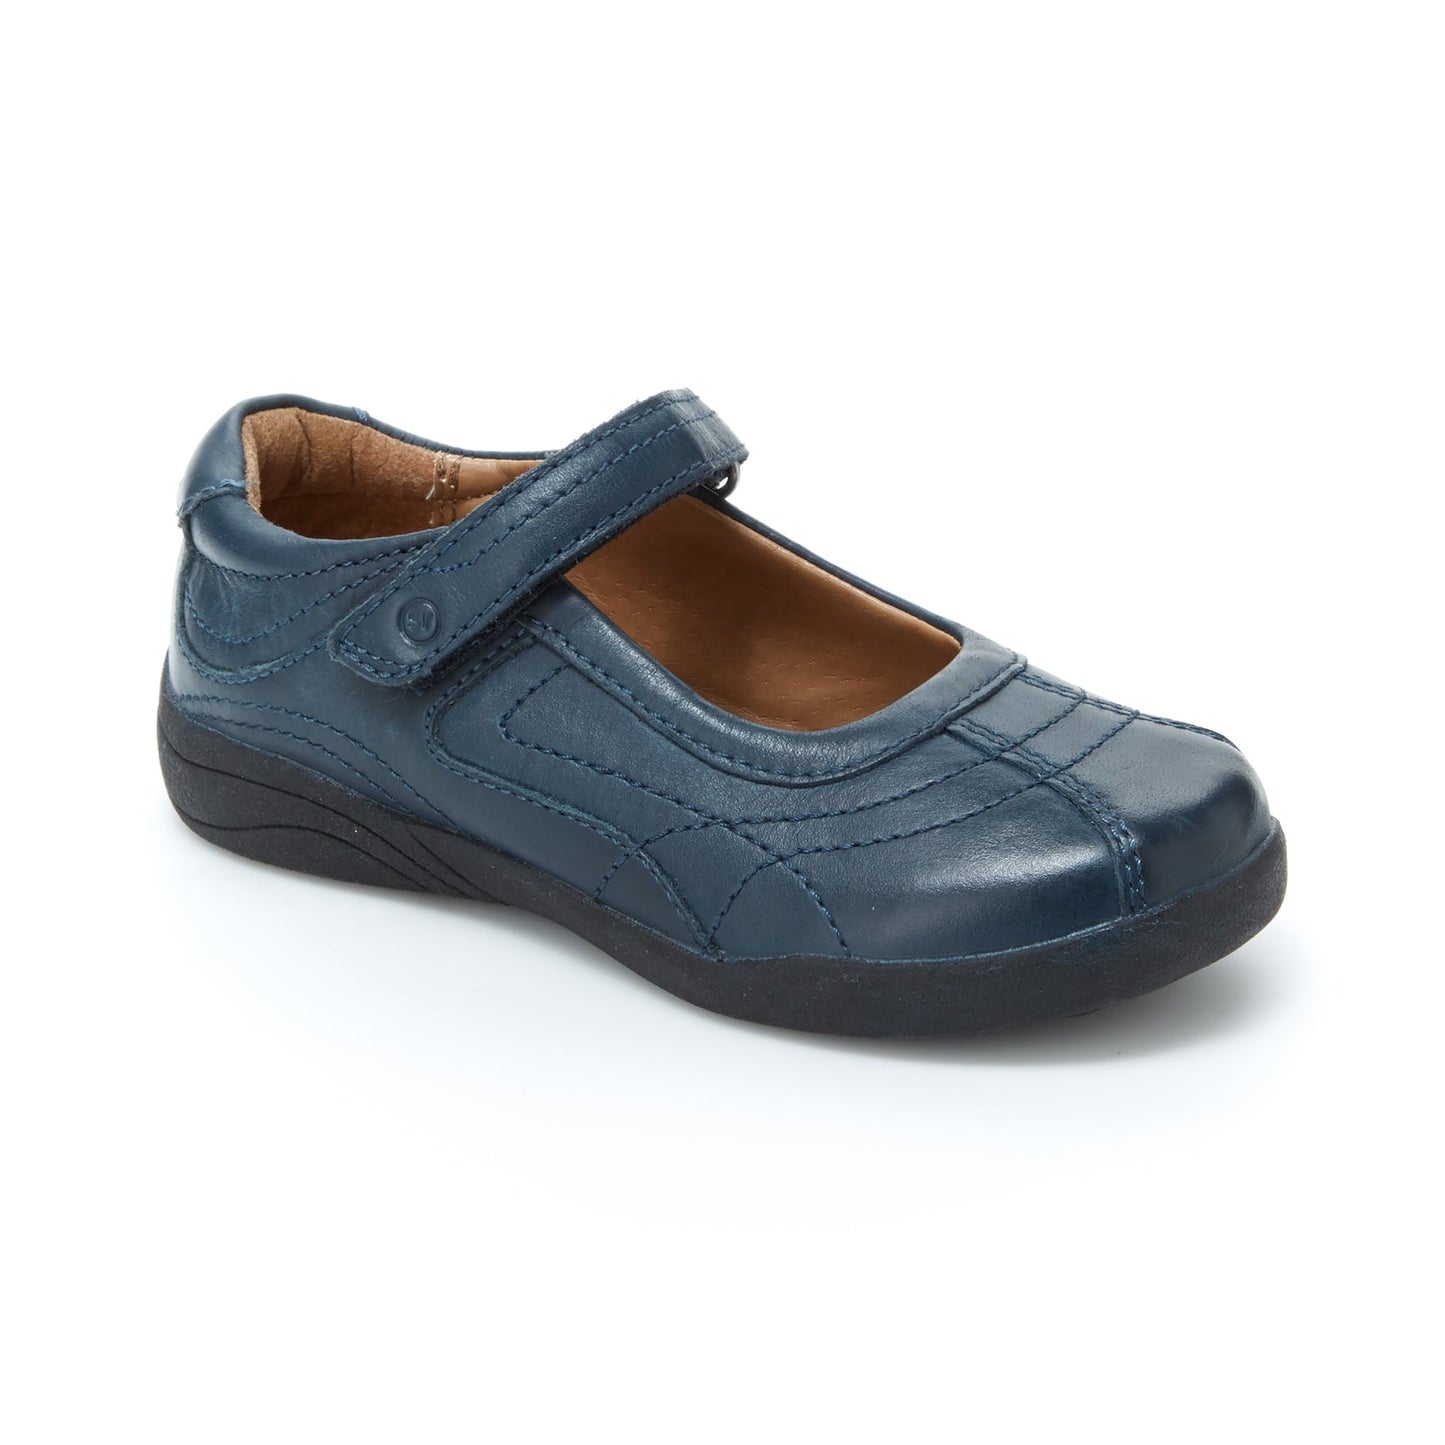 Claire Navy Mary Jane/Stride Rite